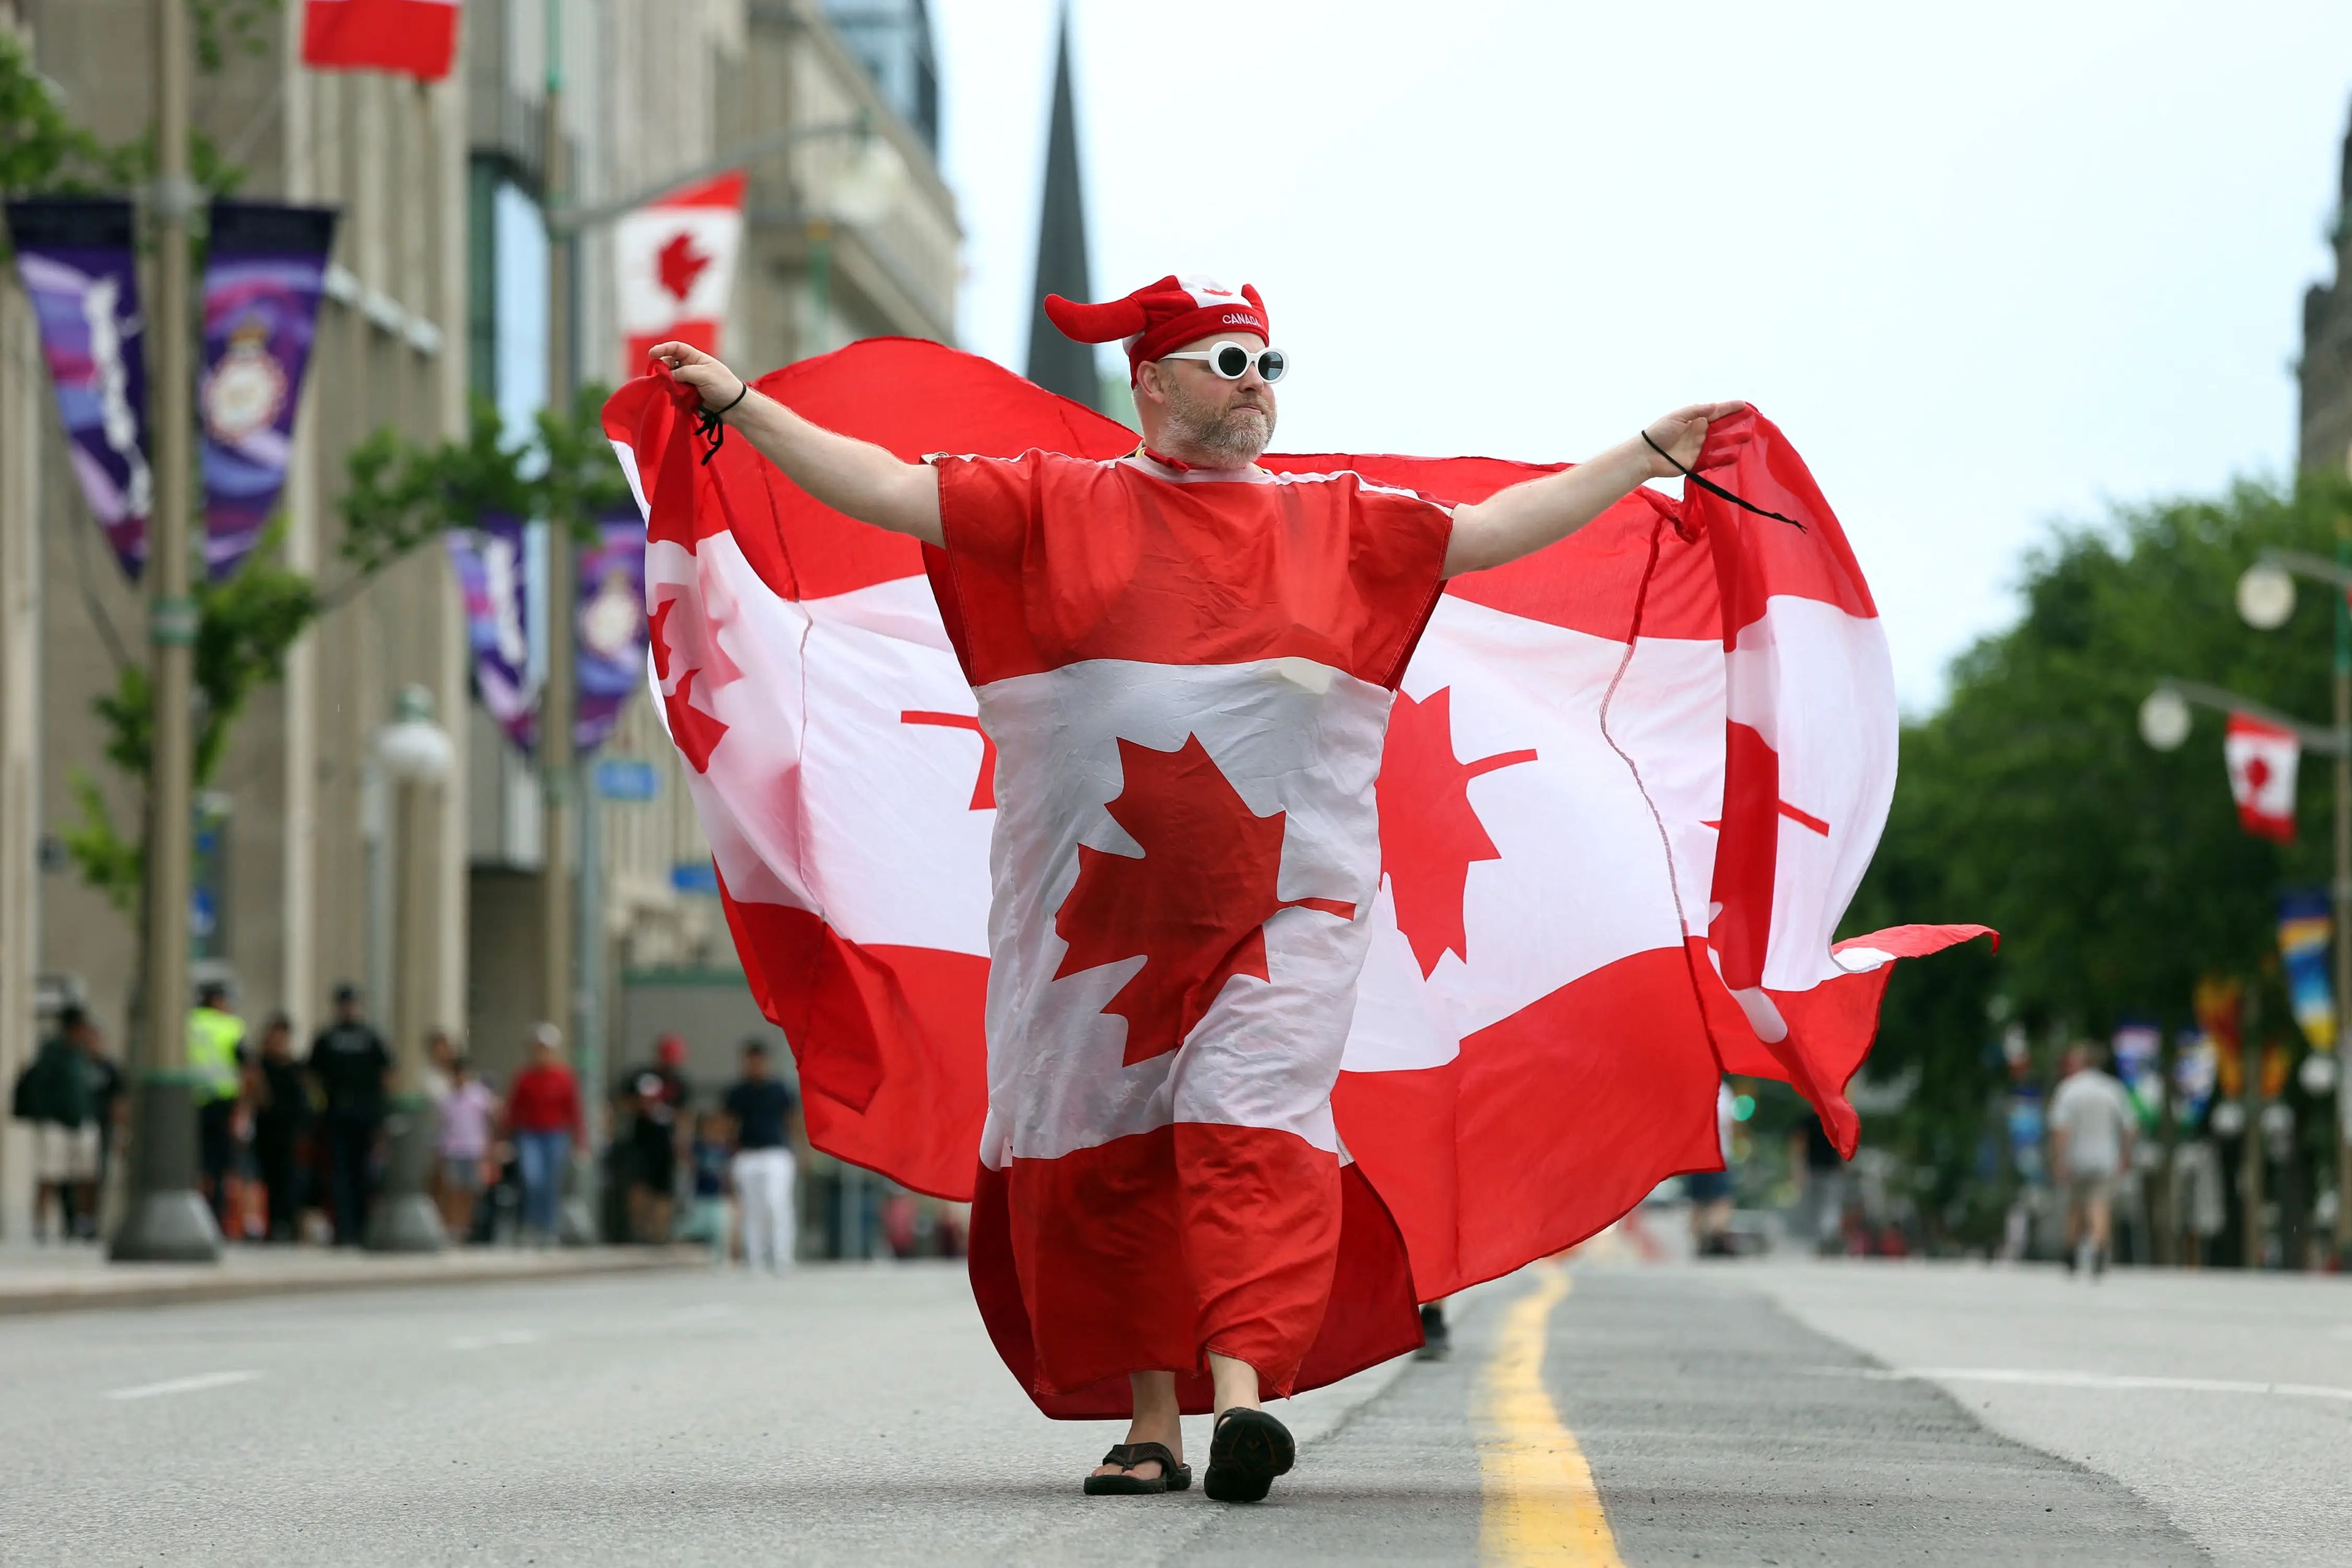 A man wrapped in two Canadian flag parades down an empty street.